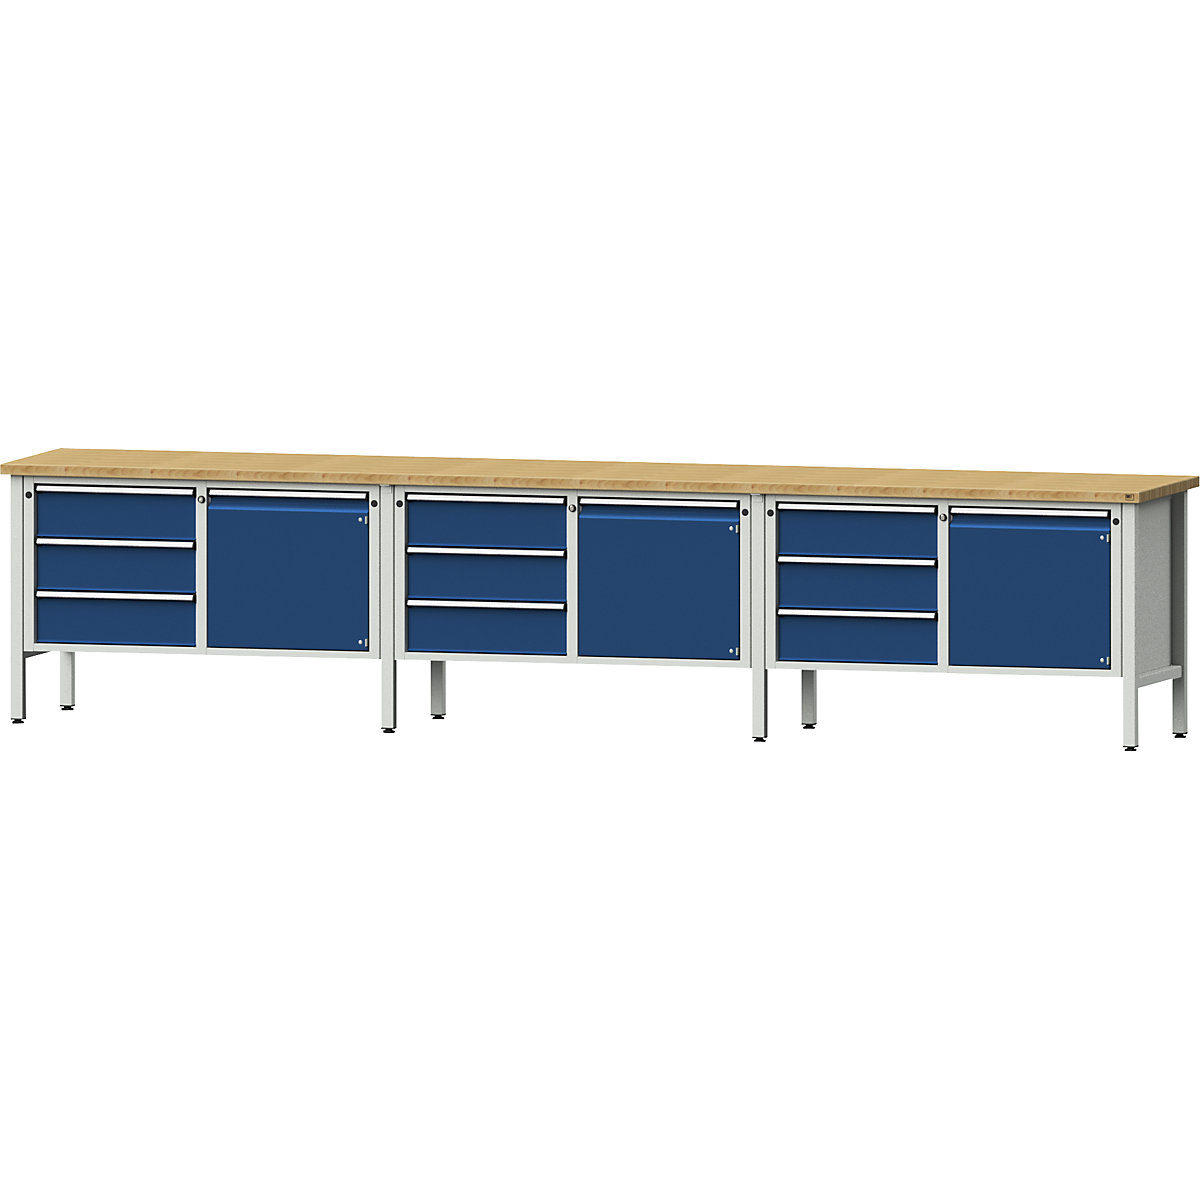 Workbench extra wide, frame construction – ANKE